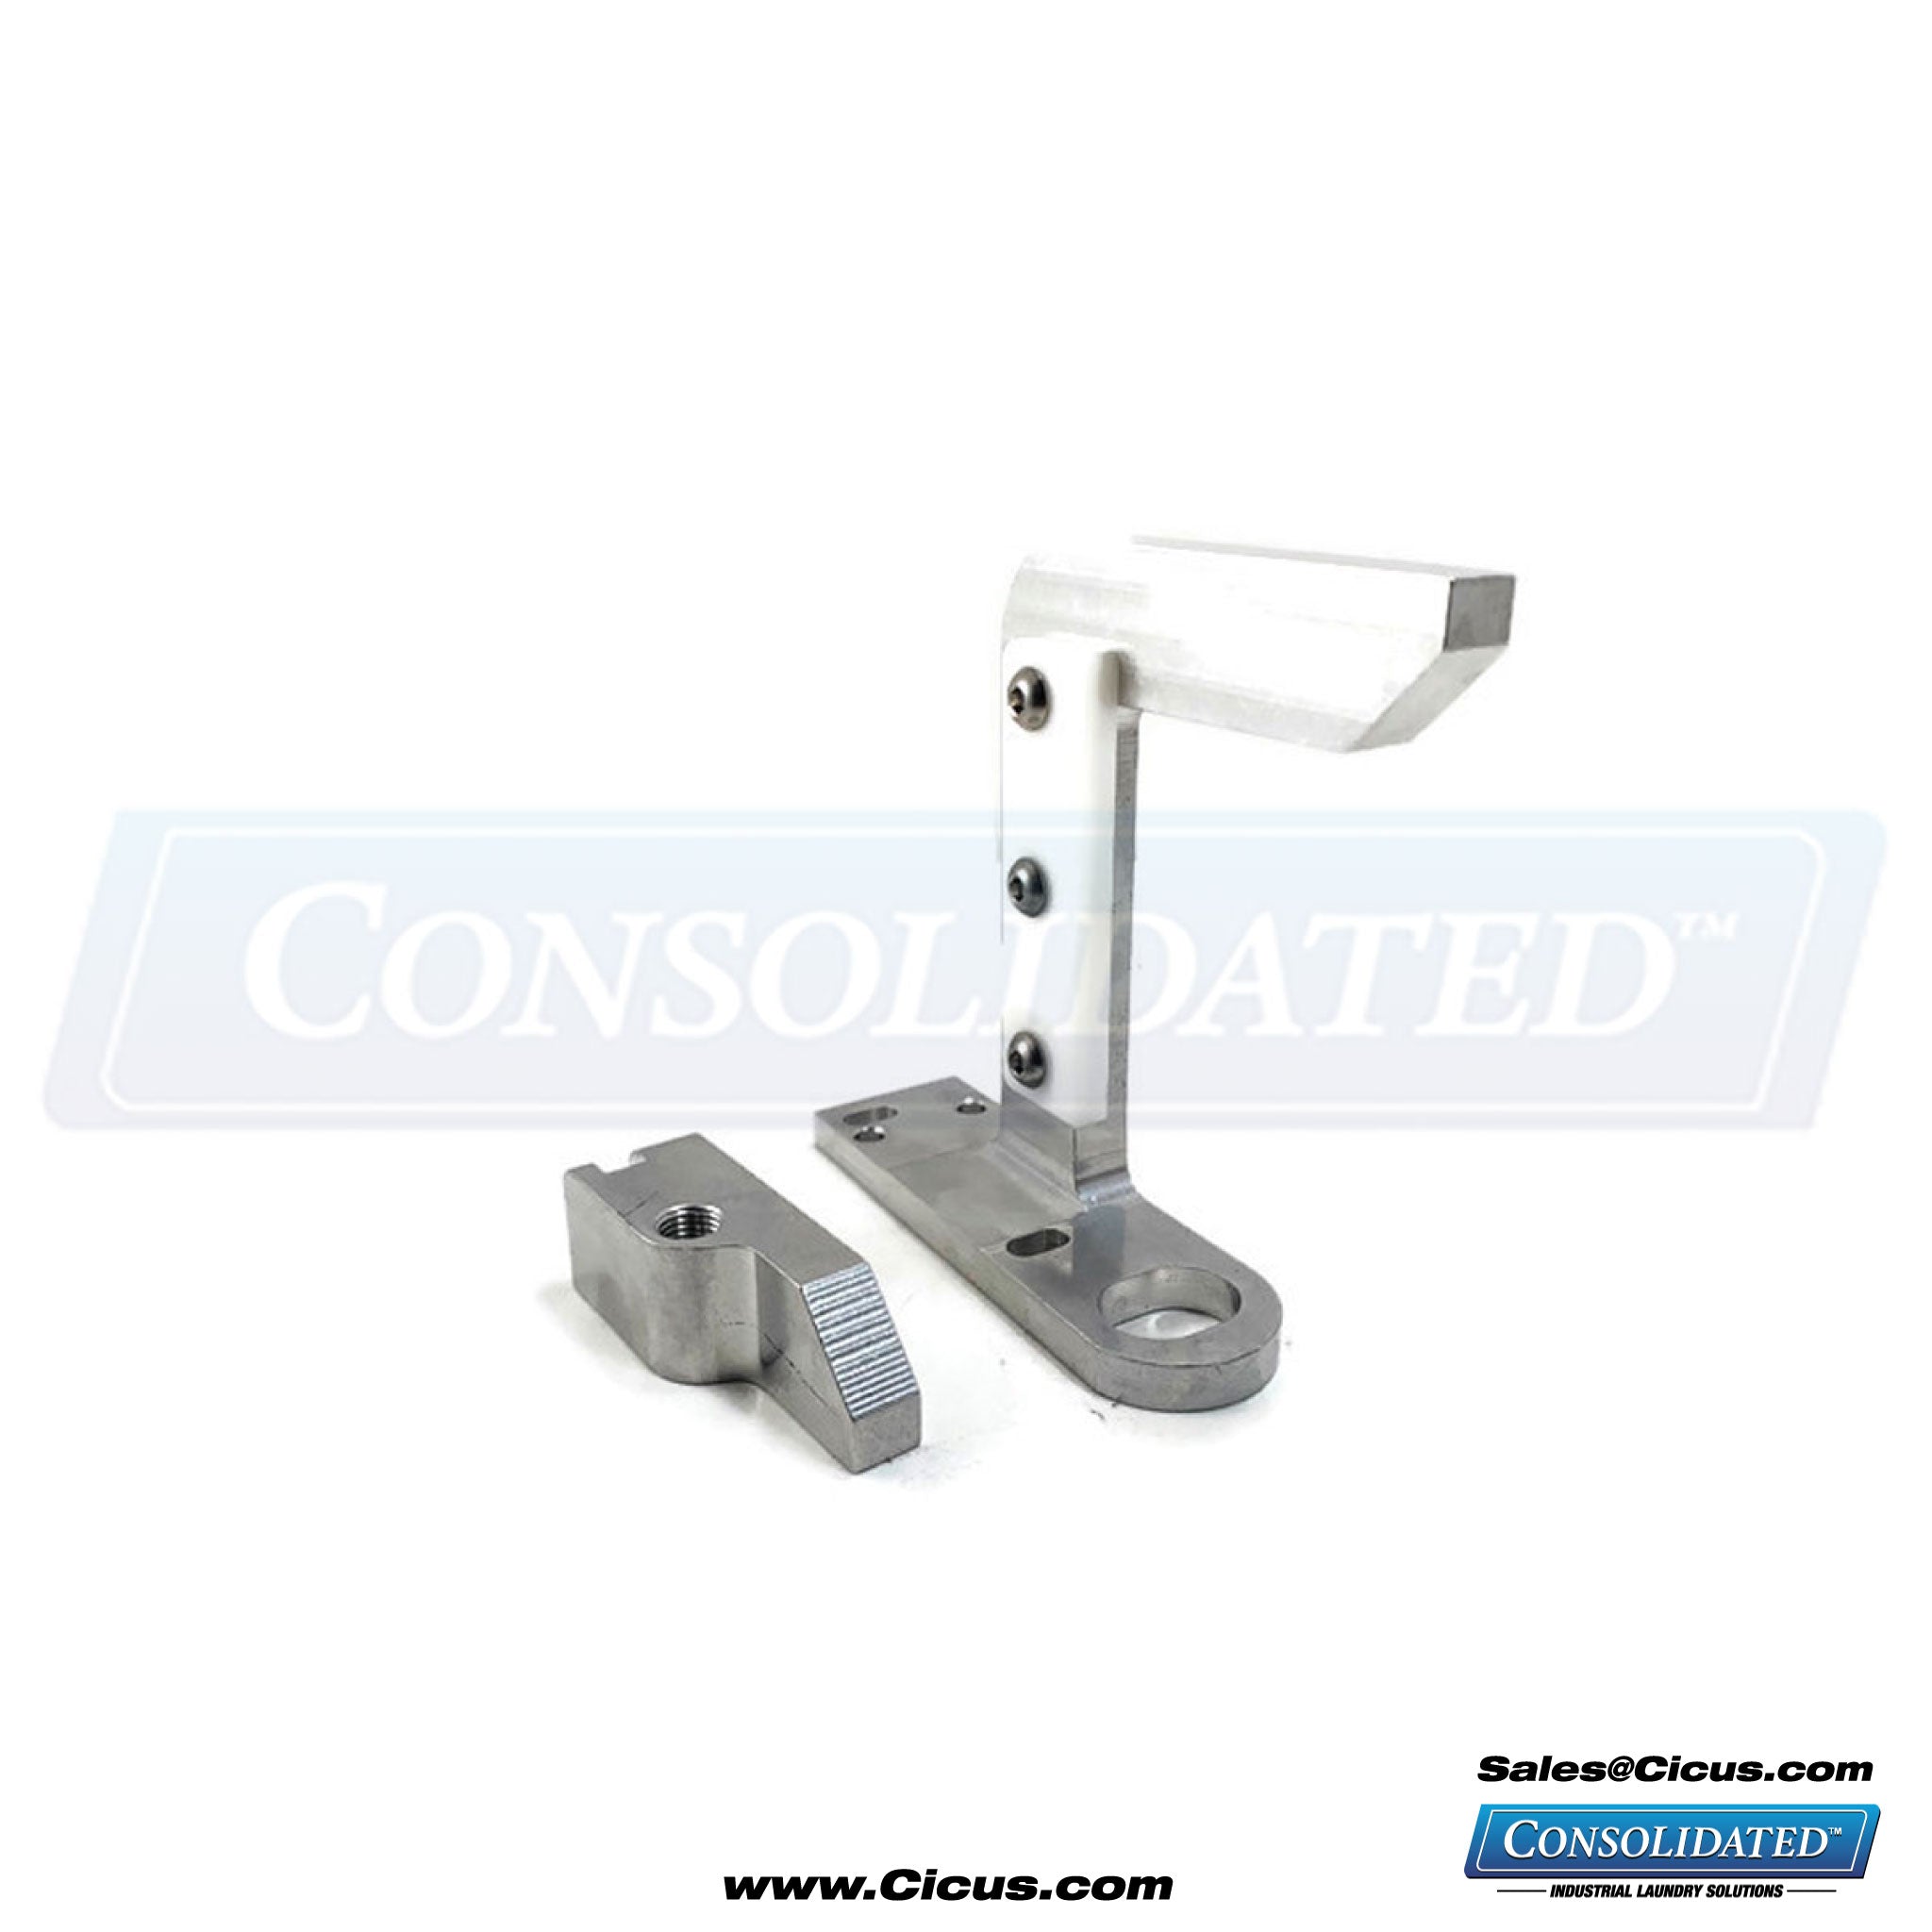 Replacement Chicago Dryer Spreader Clamp By CIC - Right [0204-260C]